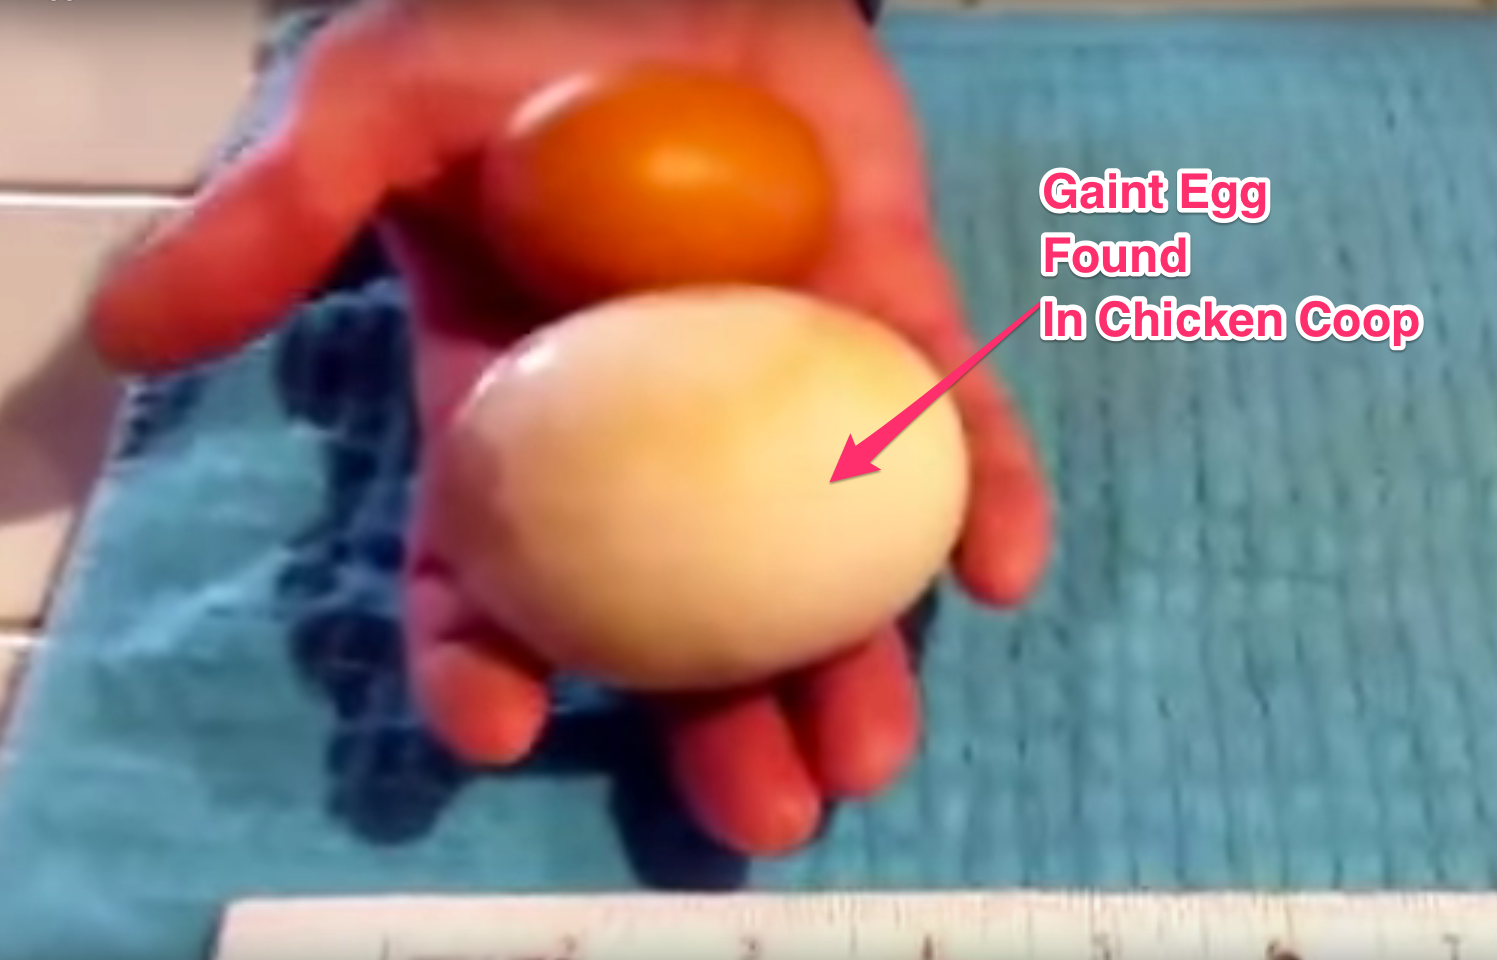 Massive 3-inch egg and you will be surprised to see whats inside